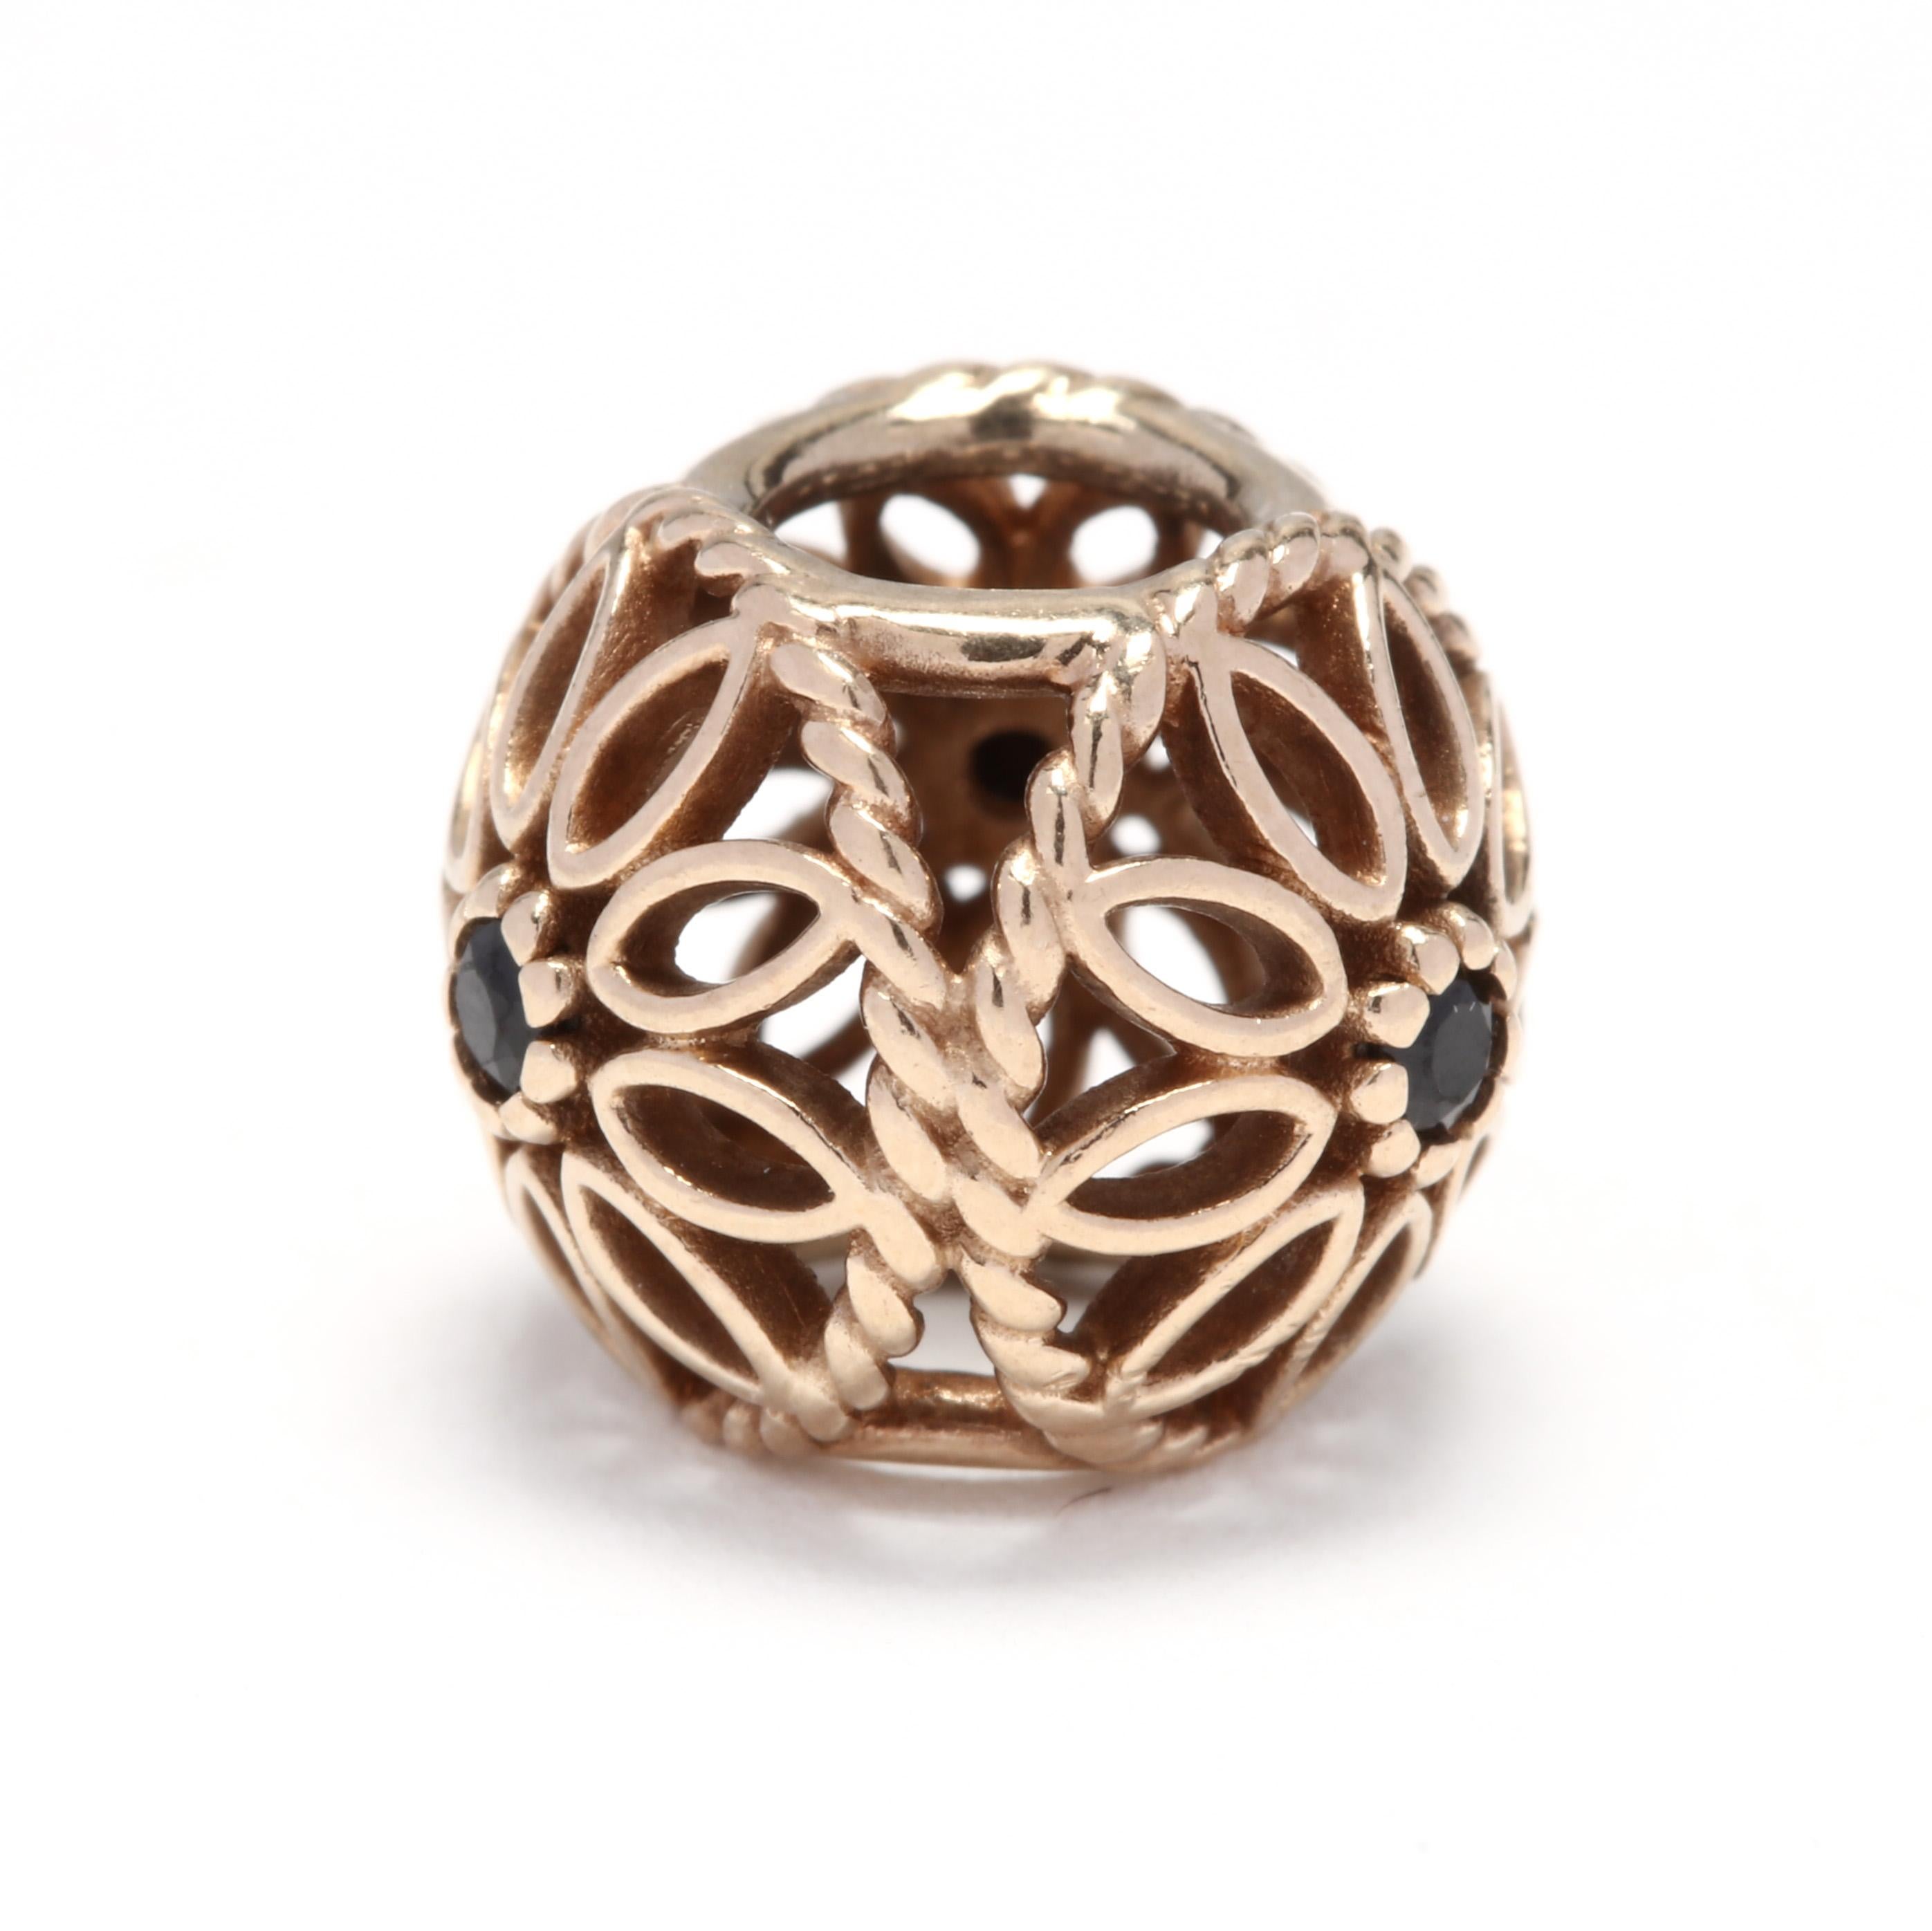 A Pandora 14 karat yellow gold and sapphire bead charm. This charm features a floral design with a bezel set, round cut sapphire in the center of each and a rope motif border.

Stones:
- sapphire
- round cut, 3 stones
- 1.75 mm

Length: 1/2